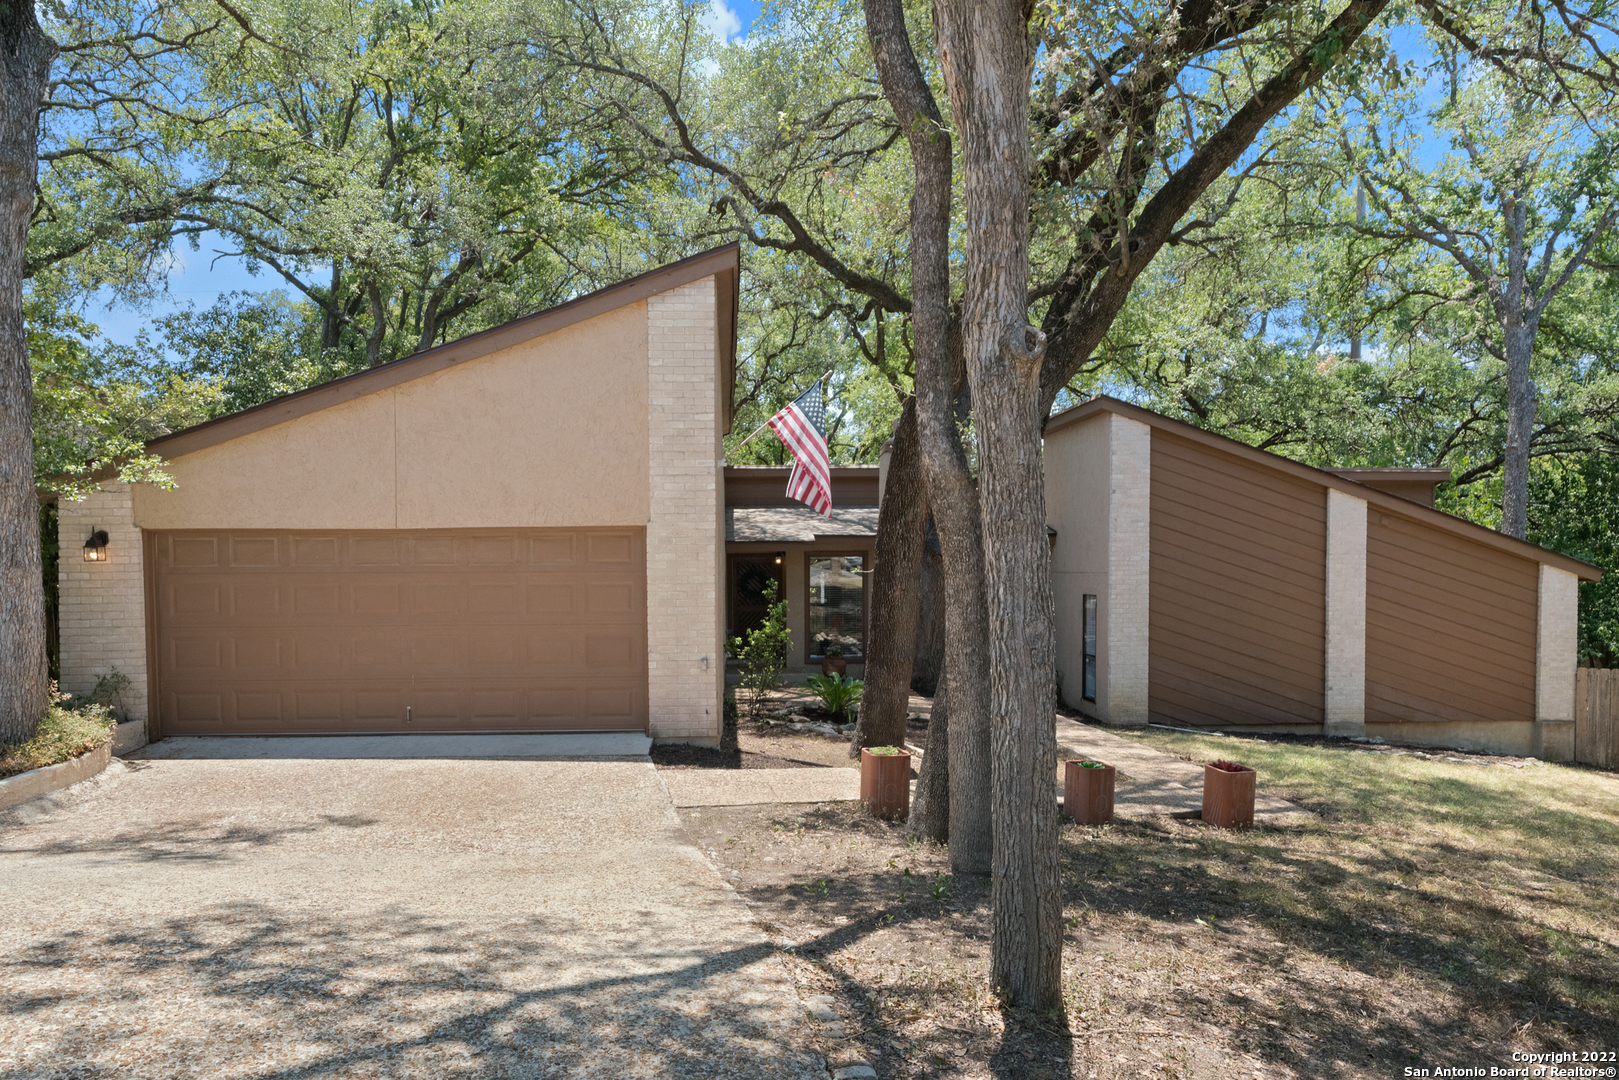 Open House Saturday and Sunday, 12-3pm! Location, location, location. This home is centrally located in the north side of San Antonio which makes its accessibility to be one of the best. Within minutes from the airport, loop 410 or 1604 and downtown. Do not miss out on this freshly painted home with a culdesac homesite and walking distance from the neighborhood pool area! As you enter the family room with a vaulted ceiling and double French doors awaits you to enter the covered back decking. The freshly painted cabinets in the kitchen has modernized the look along with the resurfaced countertops. Any baker would enjoy the double ovens. The eat in kitchen has a nice sized nook and the formal dining room within a few feet for entertaining. The secondary bedrooms are down the hall from the family room and in the rear is the owners retreat with double French doors to the backyard. The owners suite includes a bath with an oversized glass enclosed shower. The dual closets are a plus for any couple sharing the owners retreat. Don't miss out on this great opportunity in Churchill Estates.